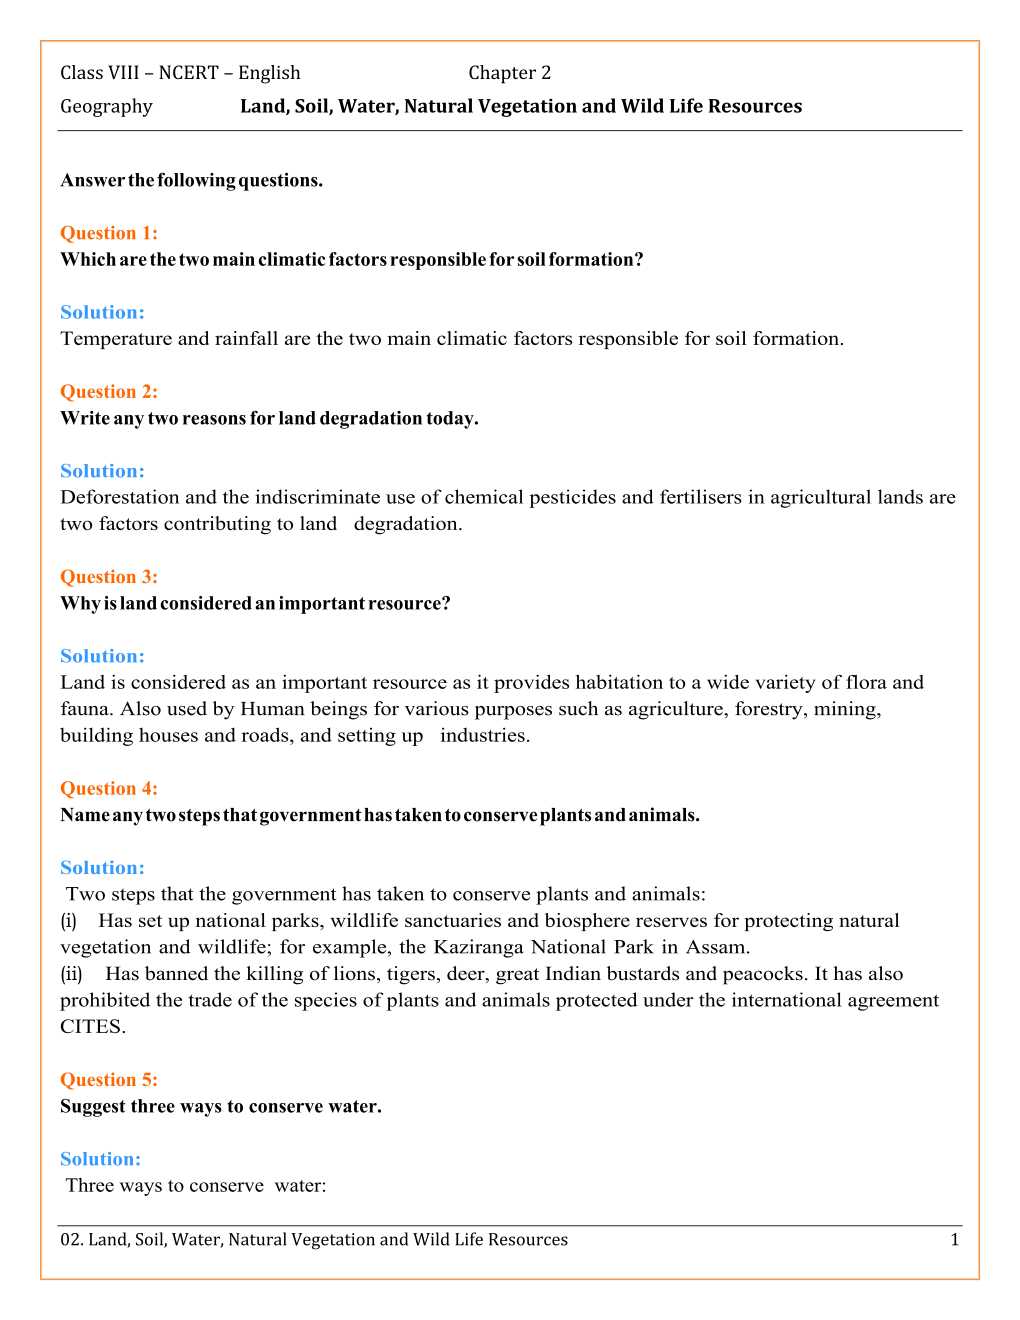 NCERT Solutions For Class 8 Social Science Resources and Development Chapter 2 